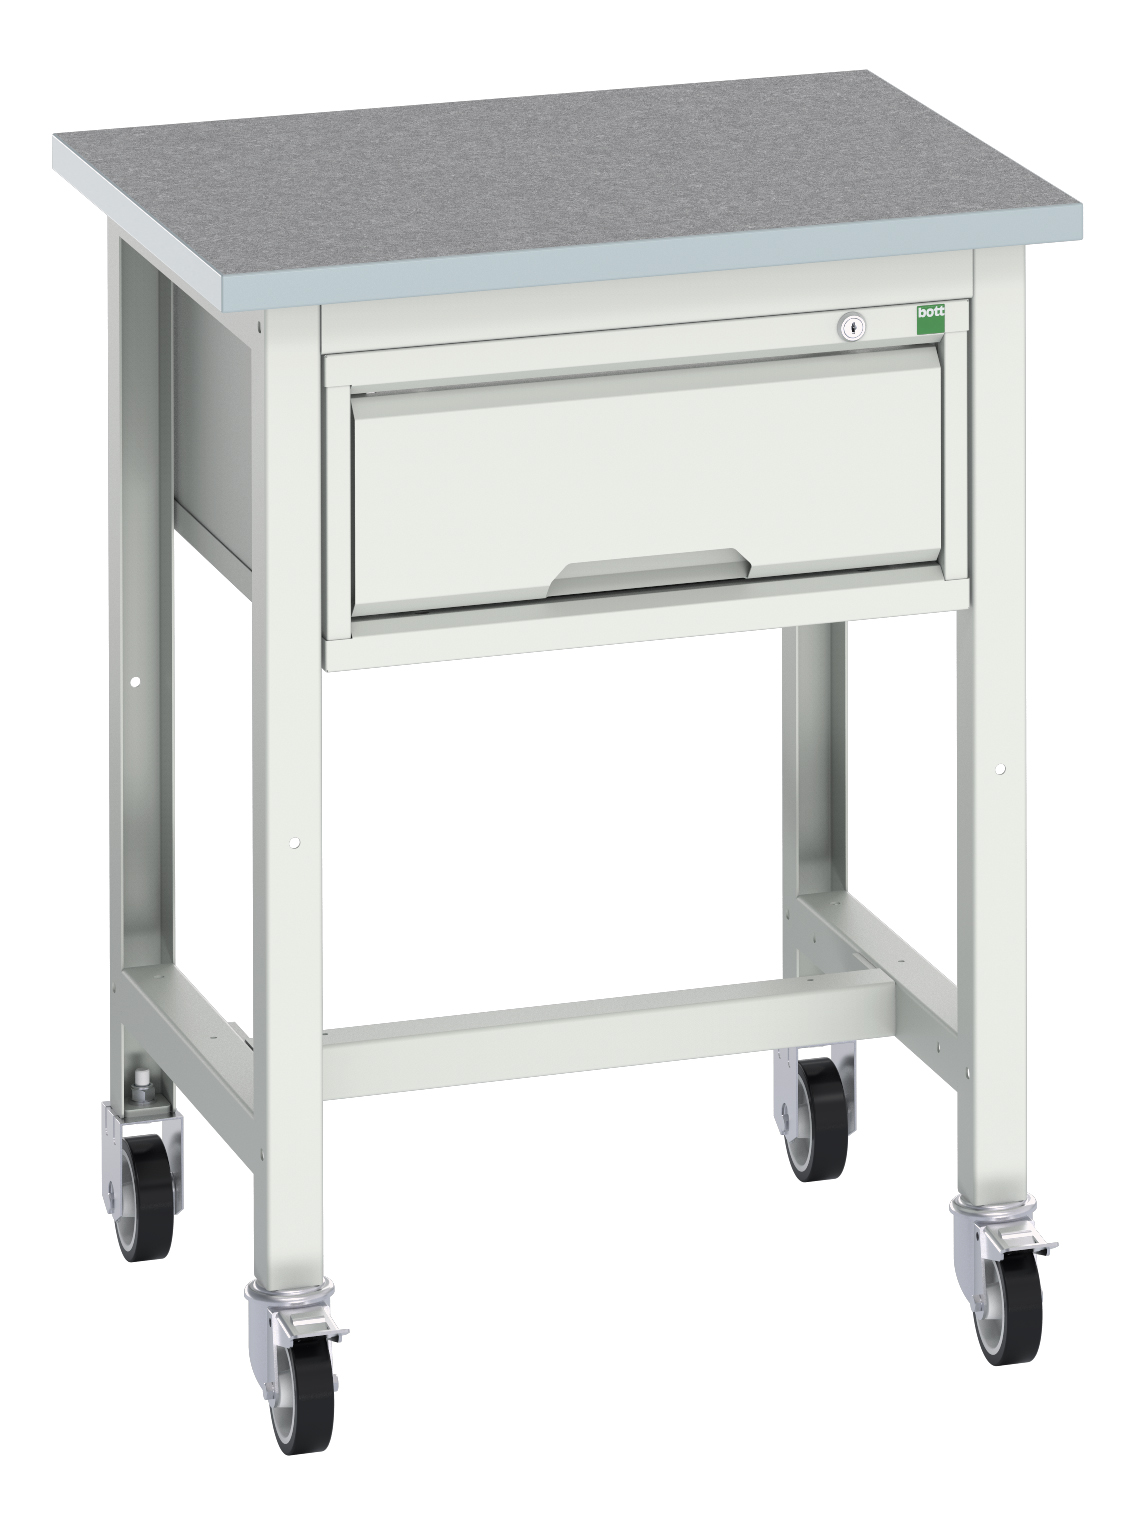 Bott Verso Mobile Workstand With 1 Drawer Cabinet - 16922201.16